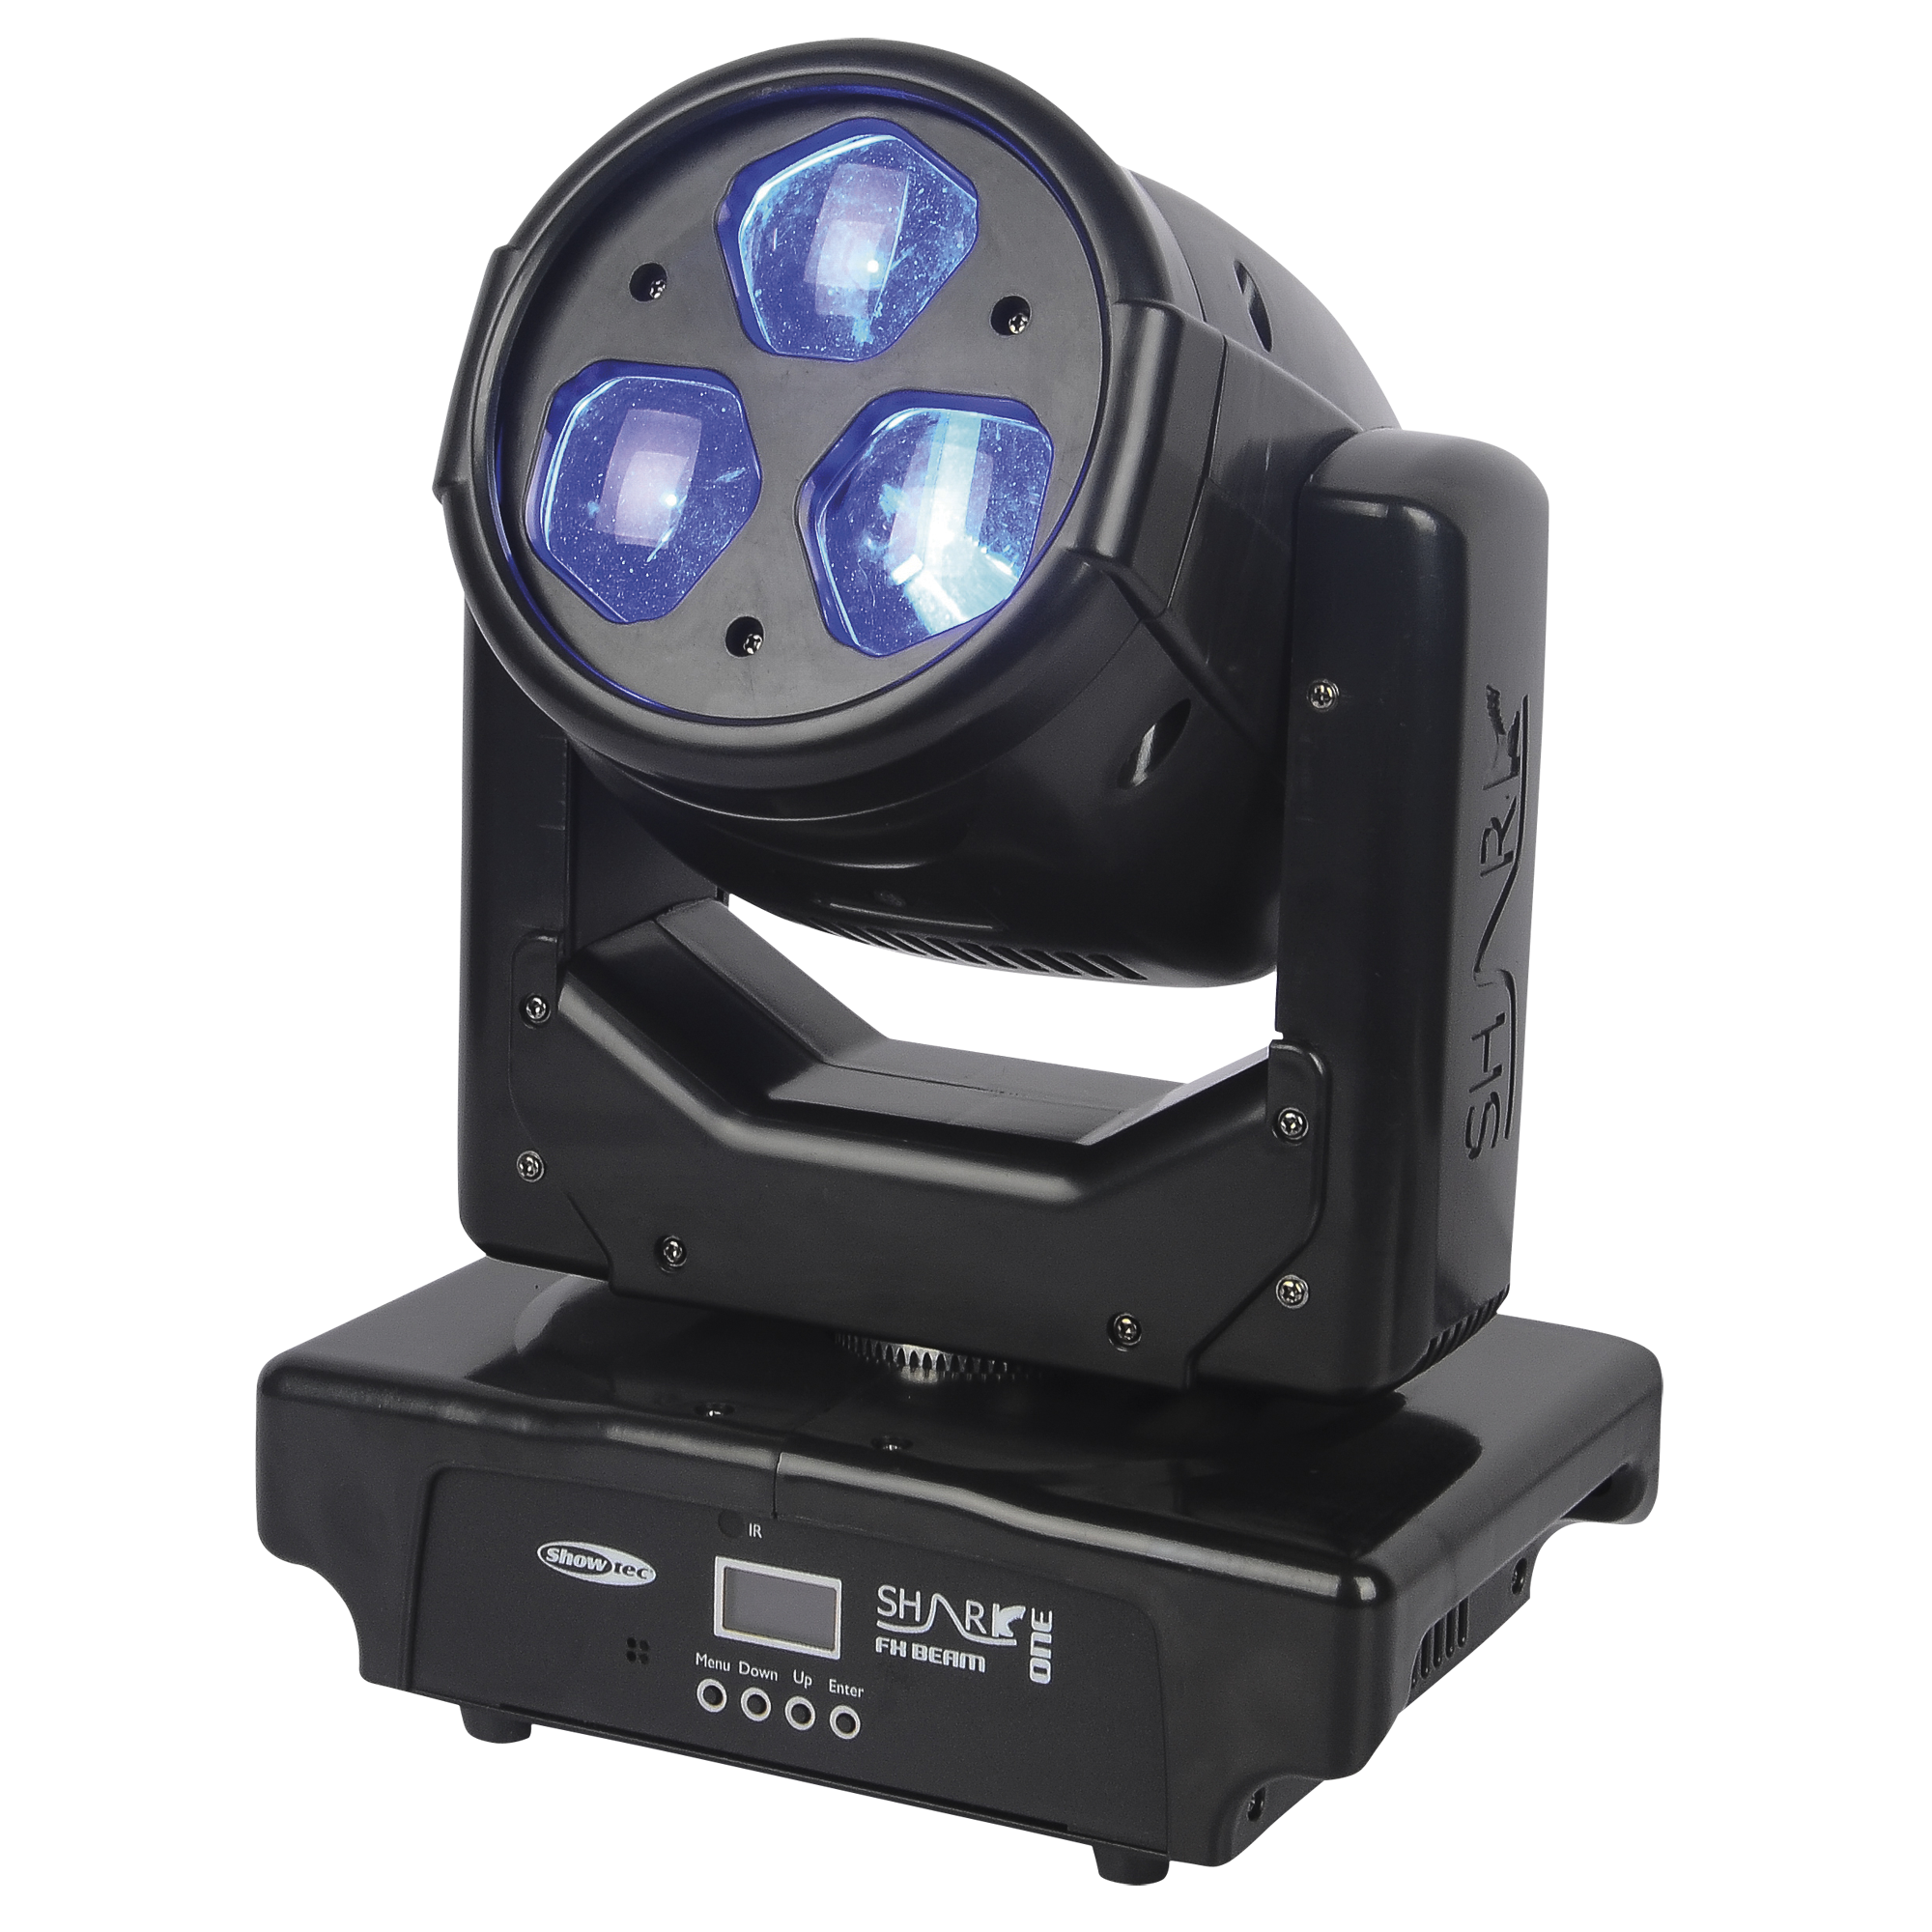 Showtec Shark Beam FX One 3 x 40 W RGBW 3-in1 LED-Beam Moving Head